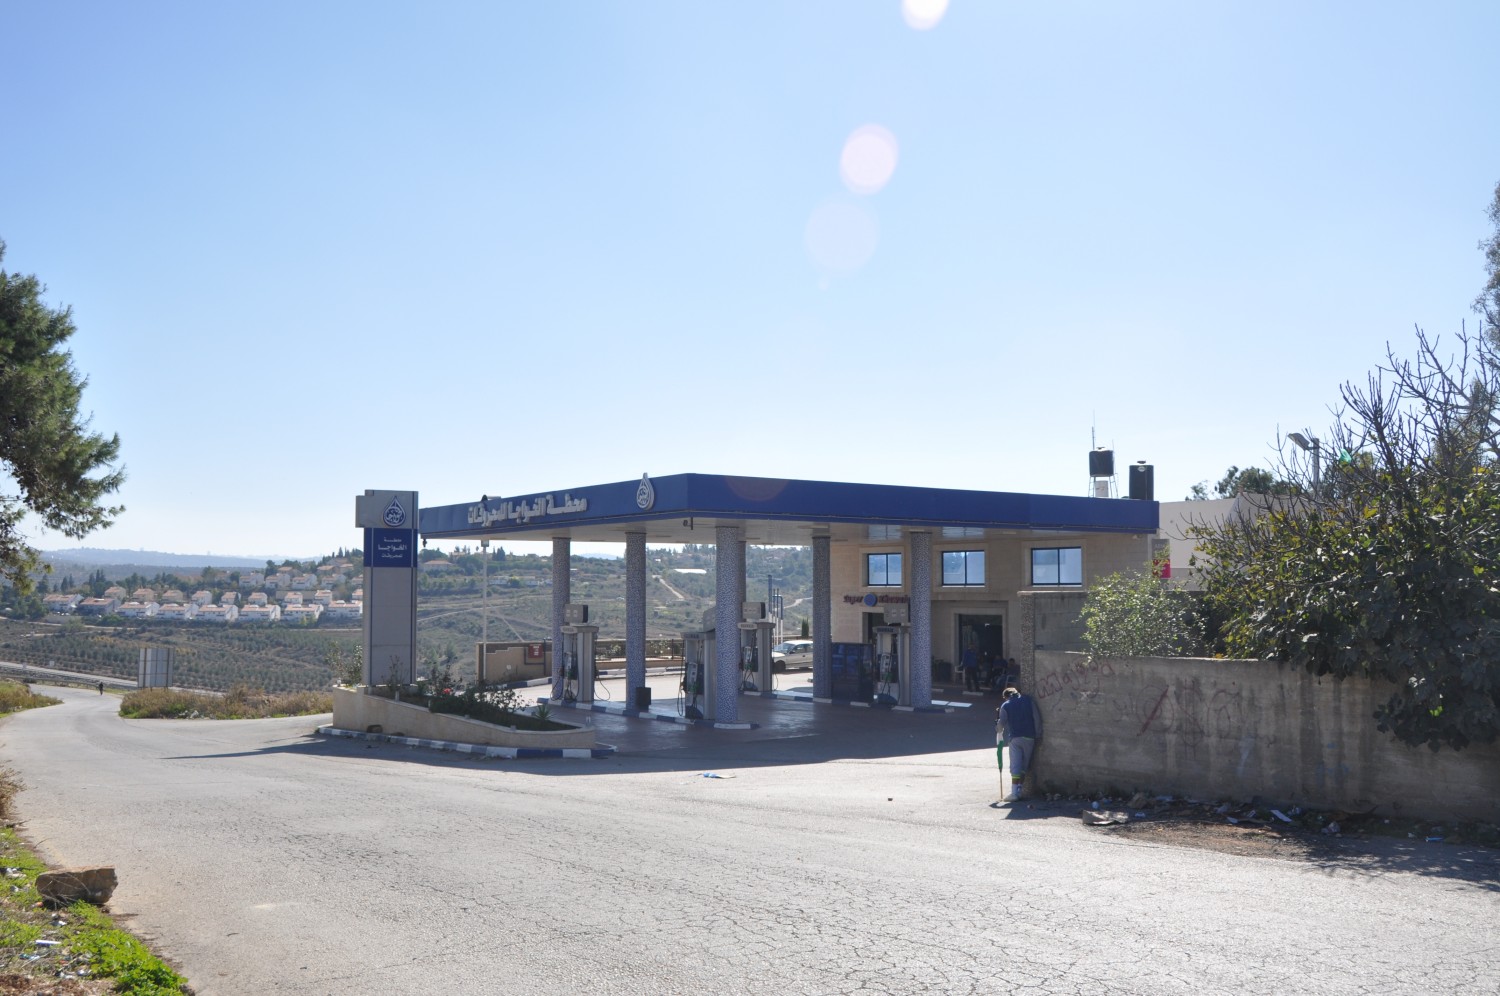 Gas station meeting point